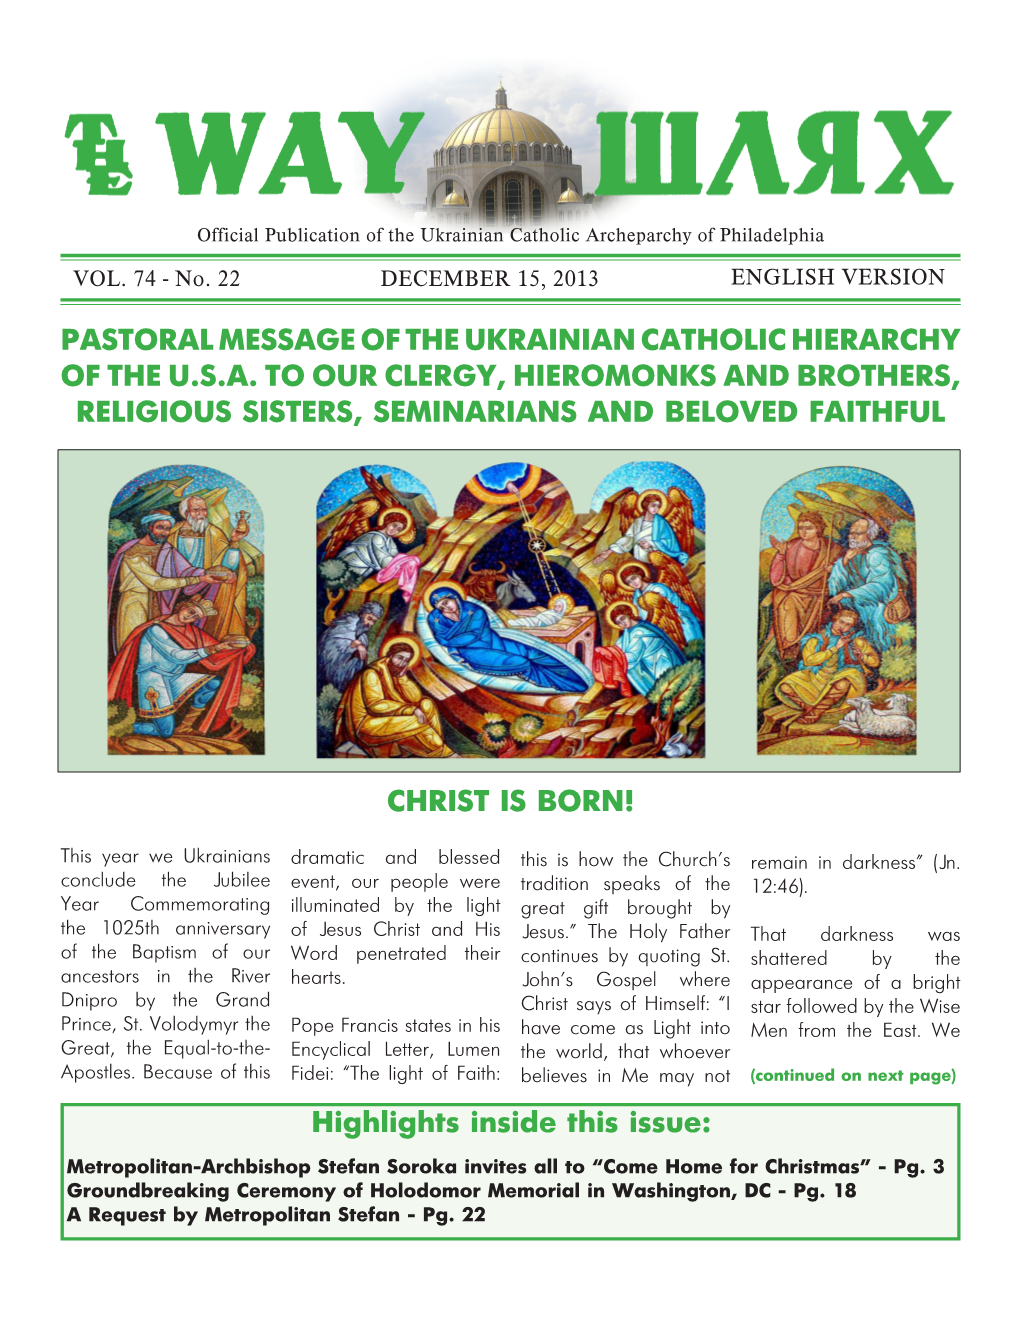 Pastoral Message of the Ukrainian Catholic Hierarchy of the U.S.A